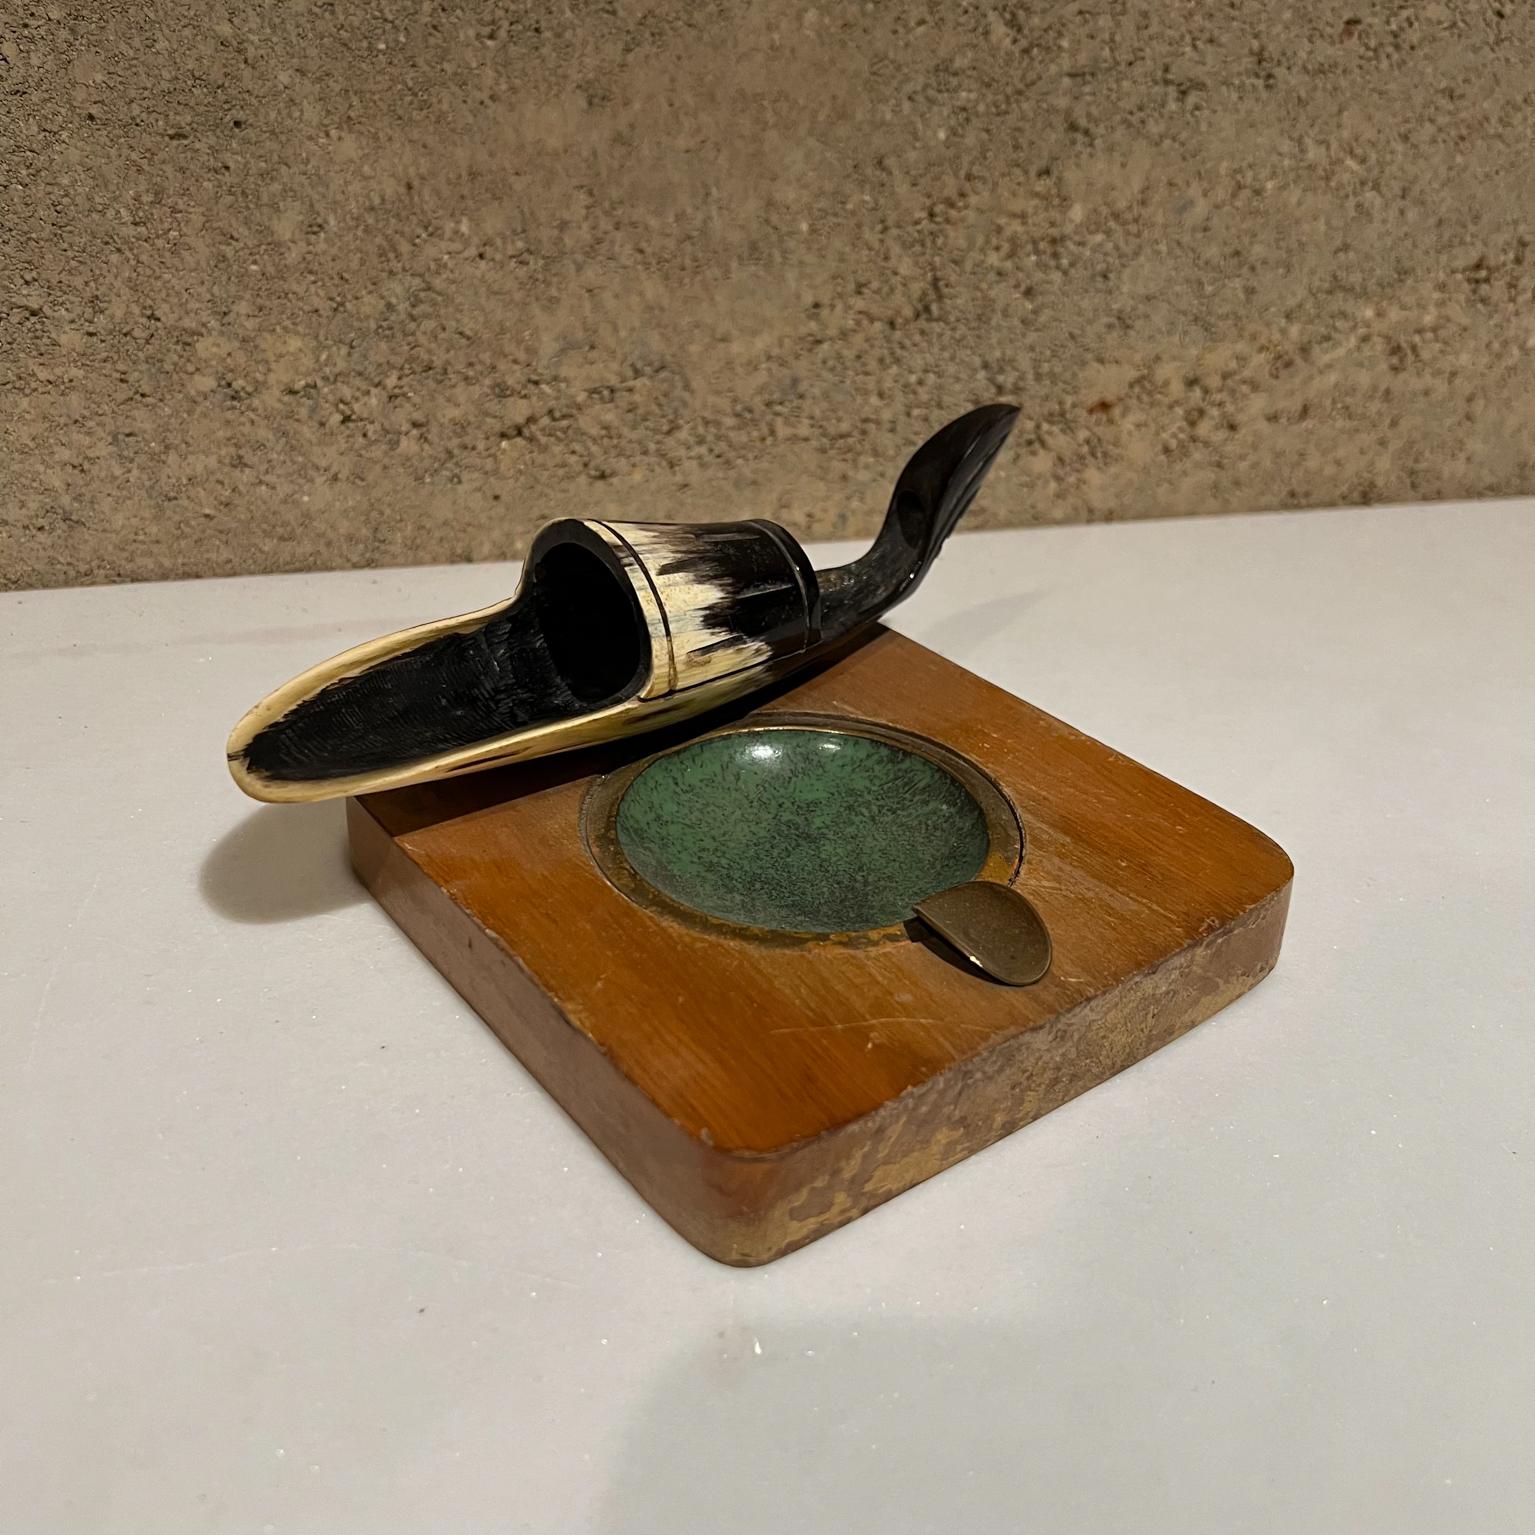 Fabulous Modern Horn Pipe holder stand ashtray in brass 
Attributed to Richard Rohac. Austria 1950s.
Unsigned.
Crafted in Horn, wood and brass.
Original unrestored condition vintage item.
Please see our images.
Measures: 5.5 width x 7.25 depth